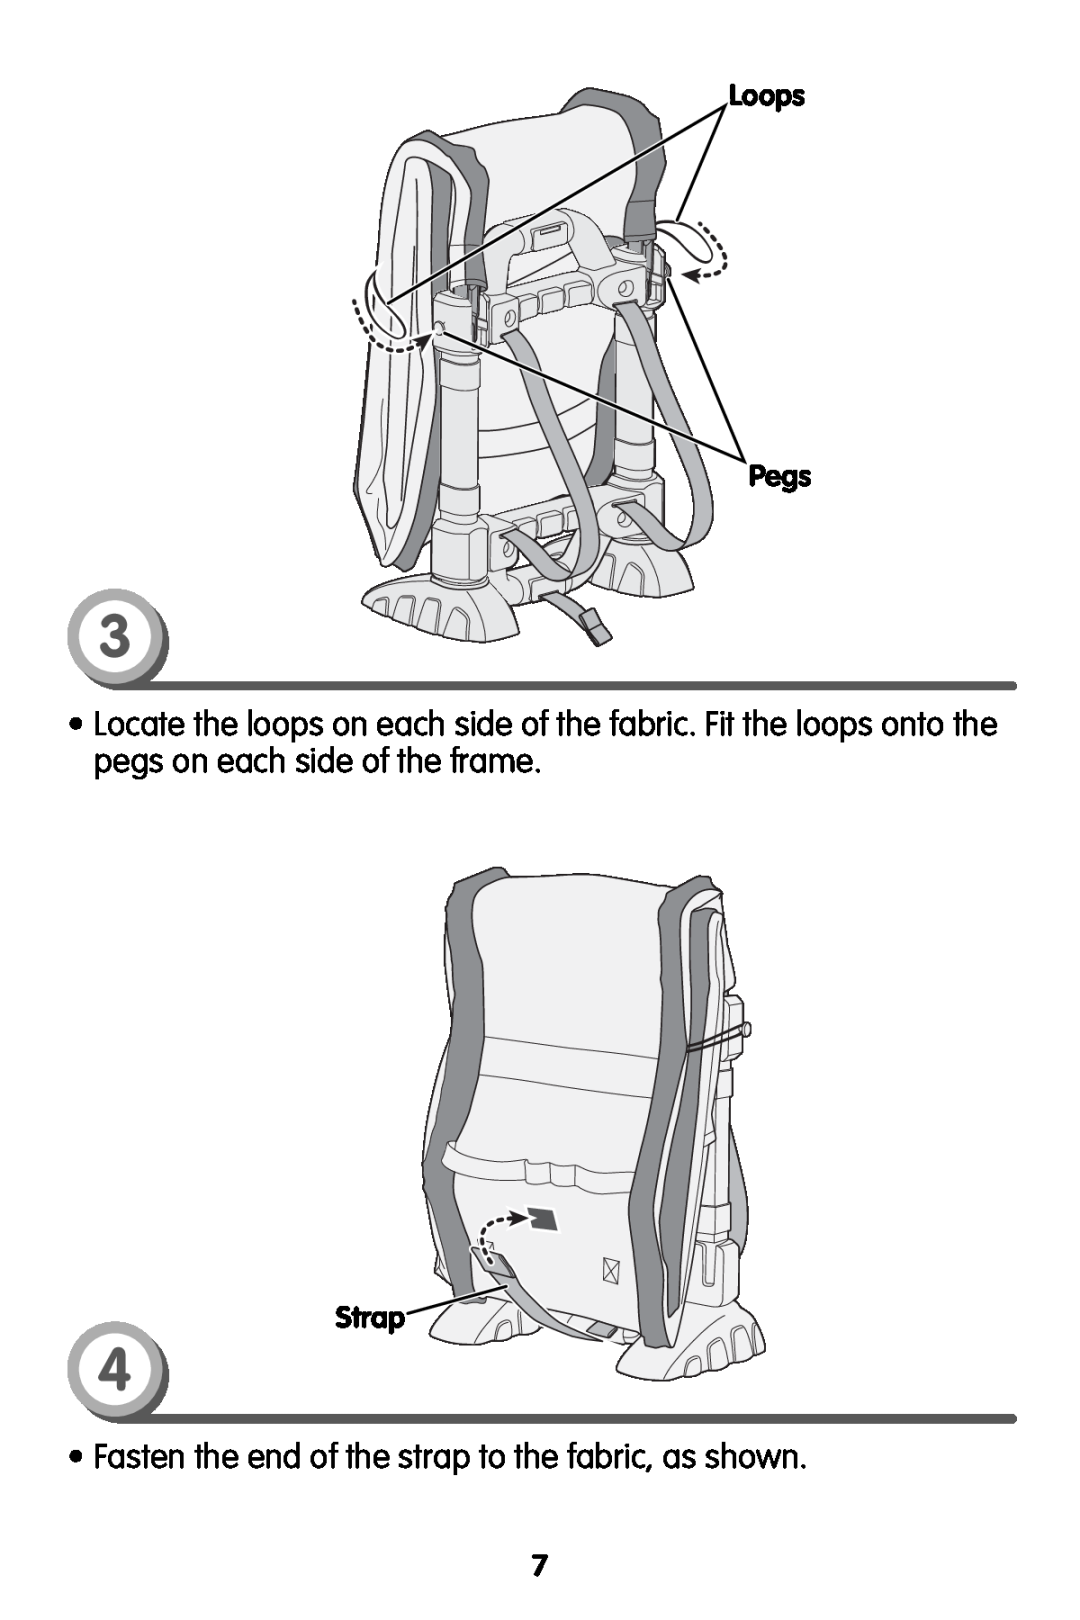 Fisher-Price V6892 instruction sheet Fasten the end of the strap to the fabric, as shown, Loops Pegs, Strap 